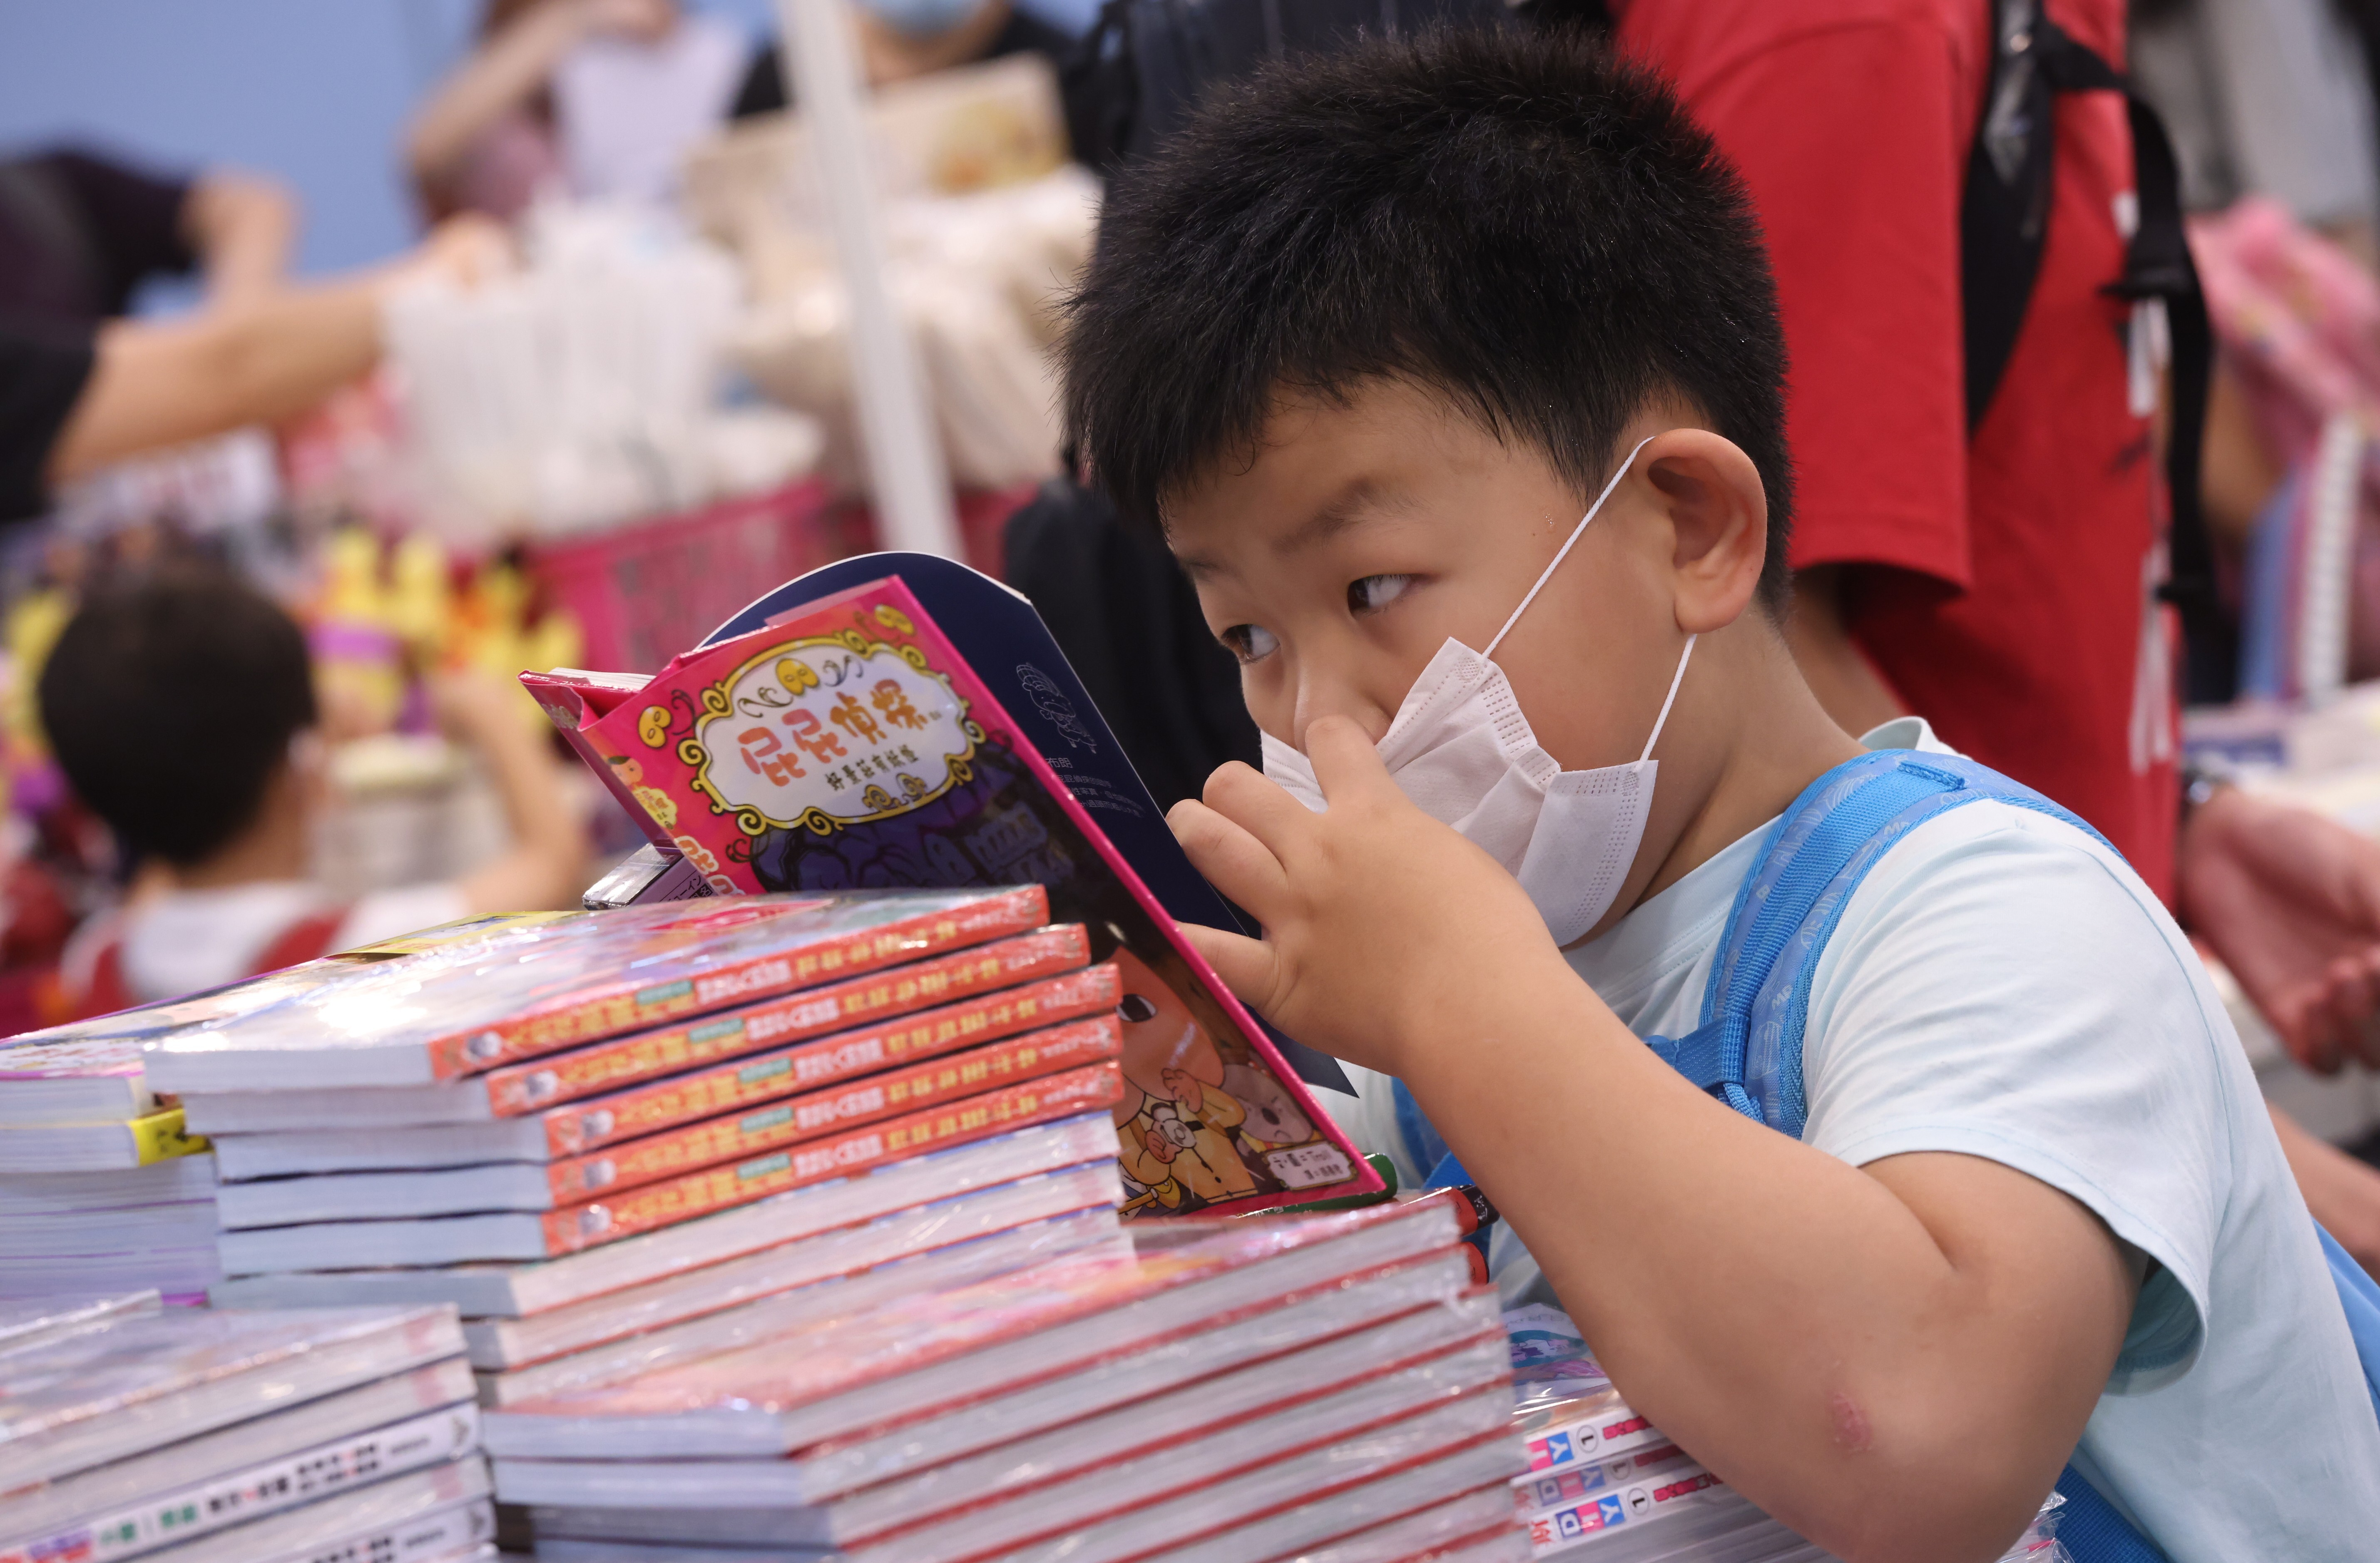 The Hong Kong Book Fair opens after a one-year delay due to the coronavirus pandemic, with many exhibitors cautious about the national security law. Photo: SCMP / K. Y. Cheng